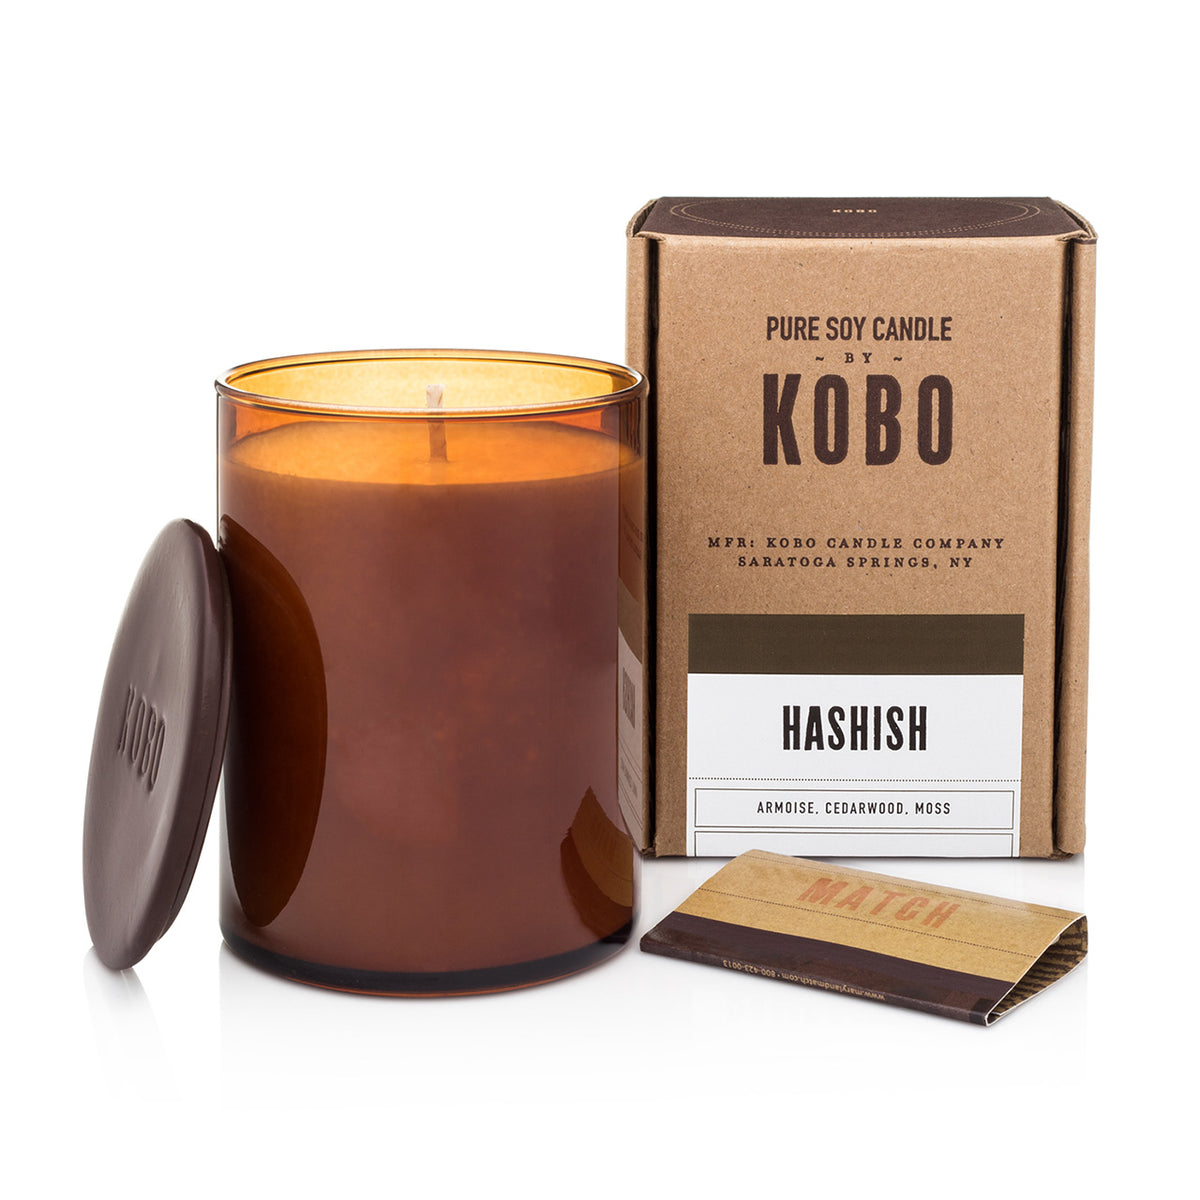 Kobo Large Pure Soy Candle in an amber glass jar with ceramic lid, matches and kraft box. Dusky scent